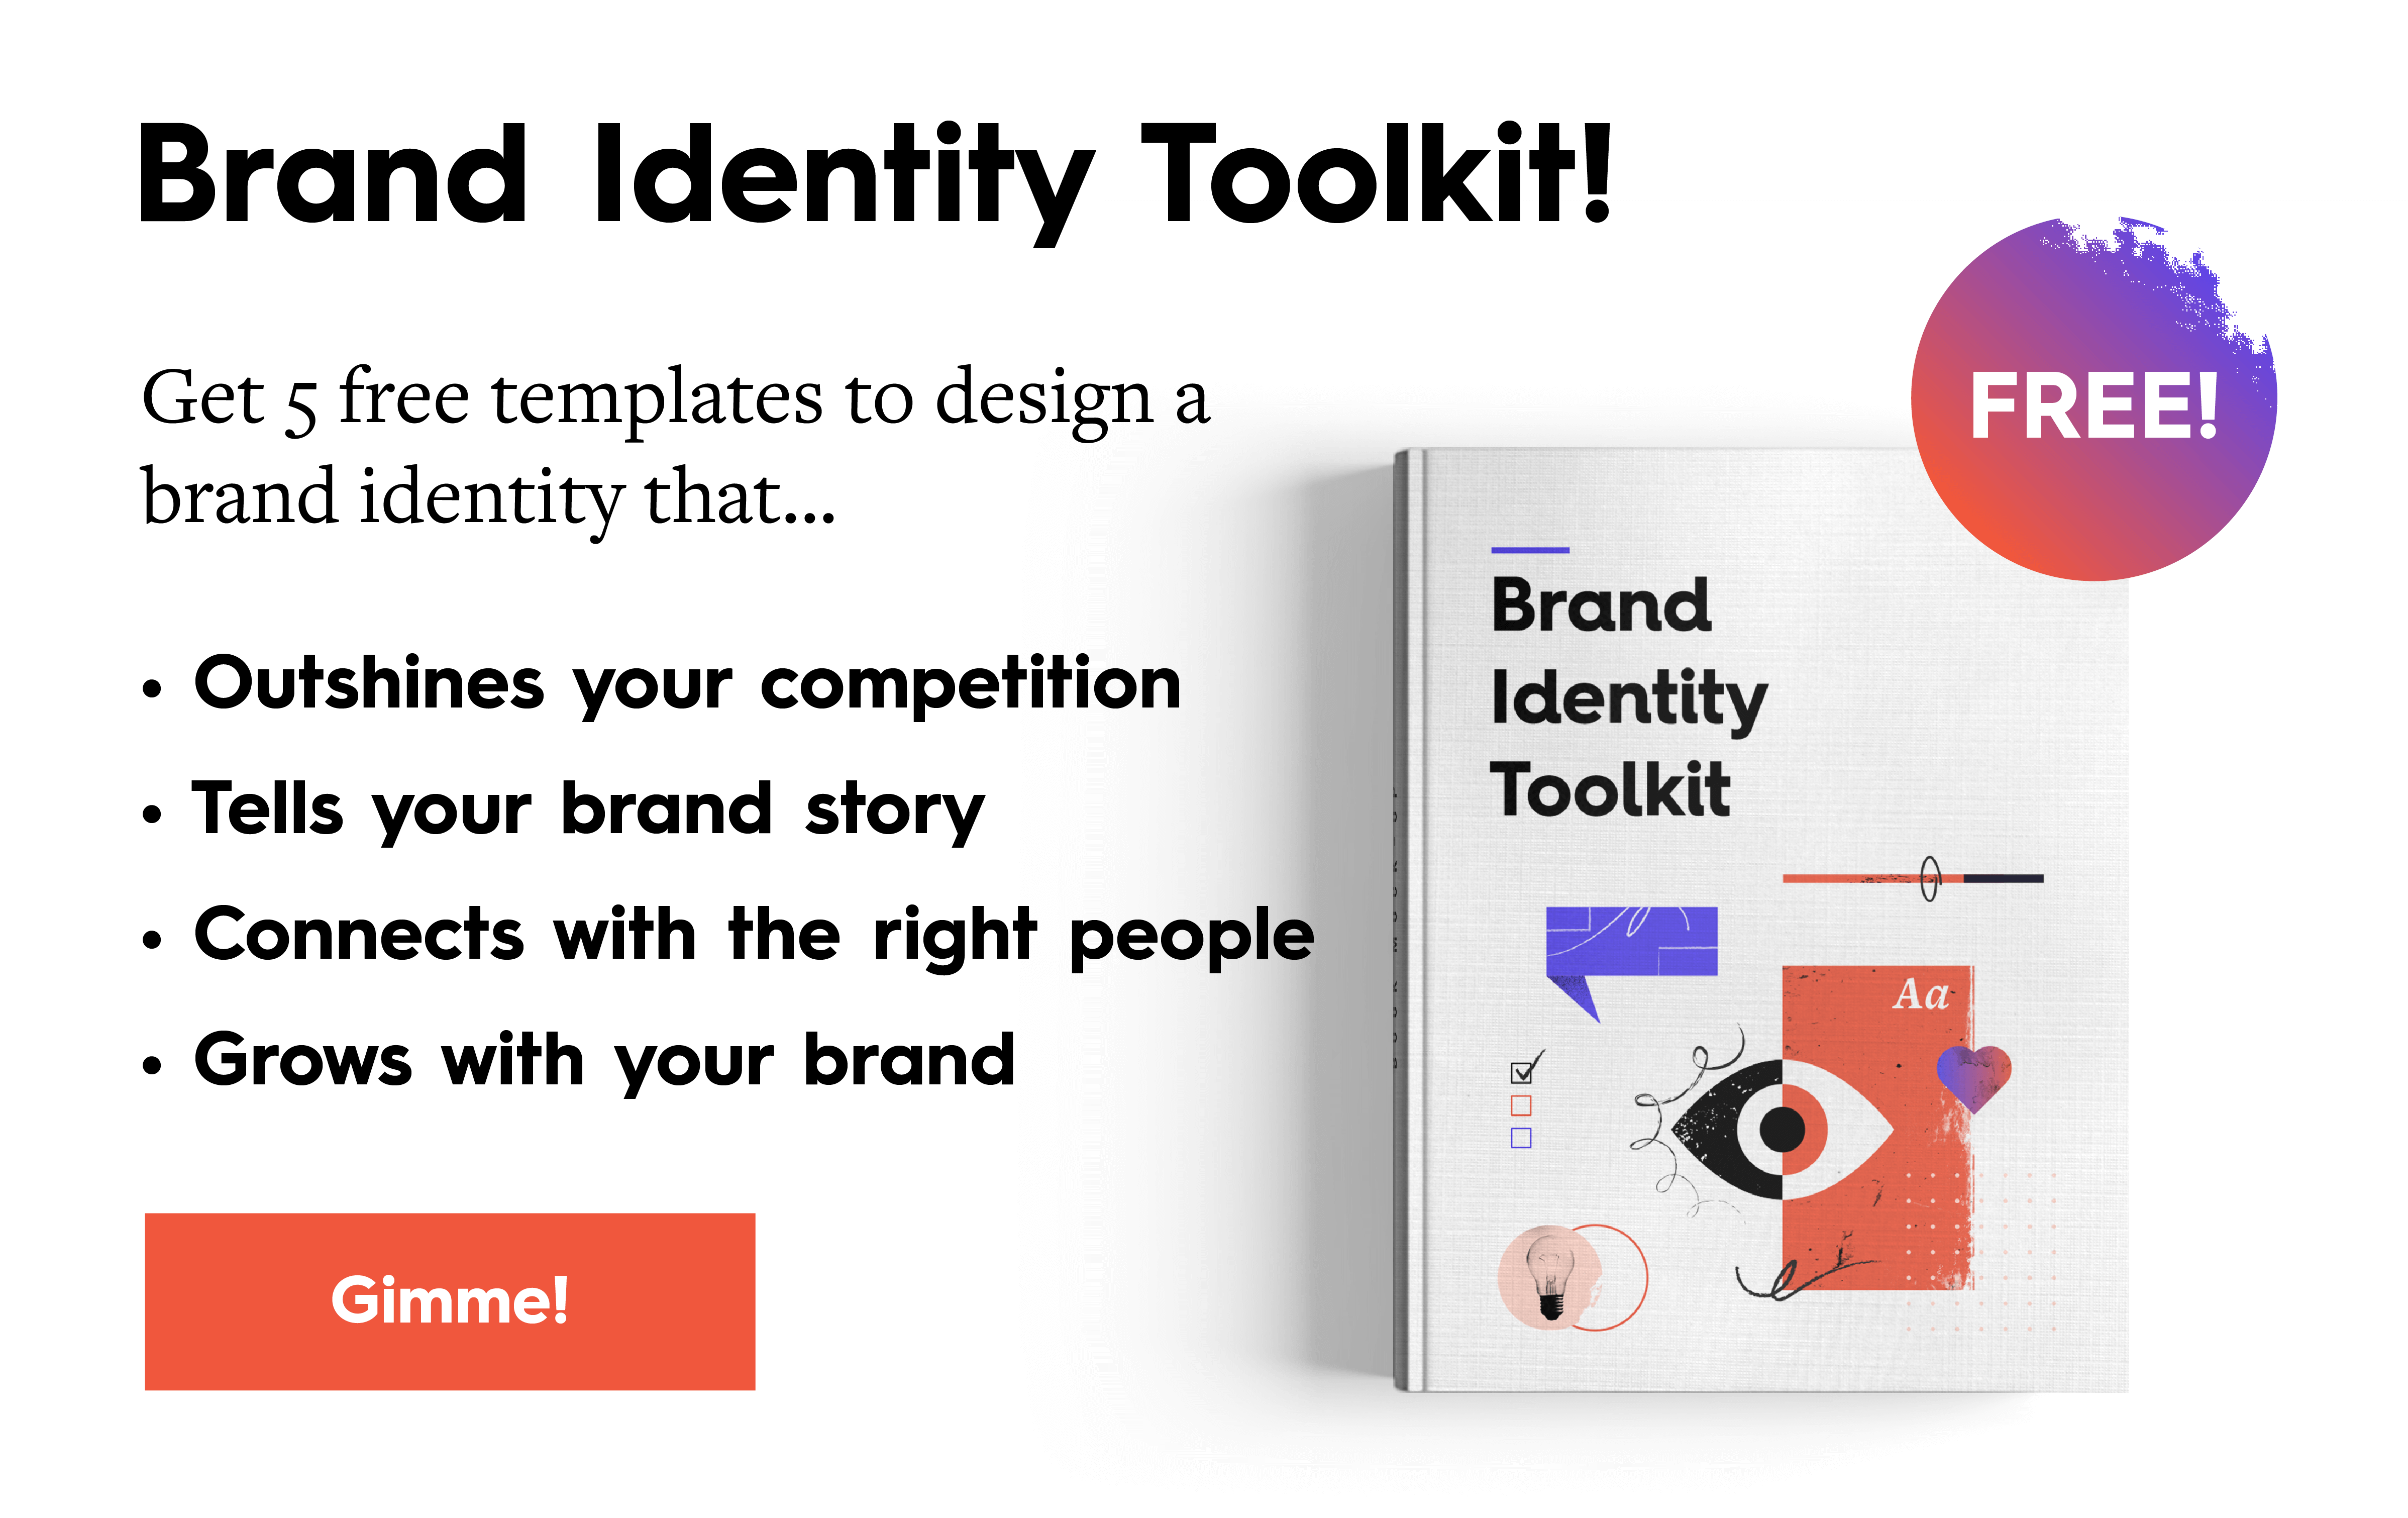 Brand Identity: Definition, Elements, and How to Create It